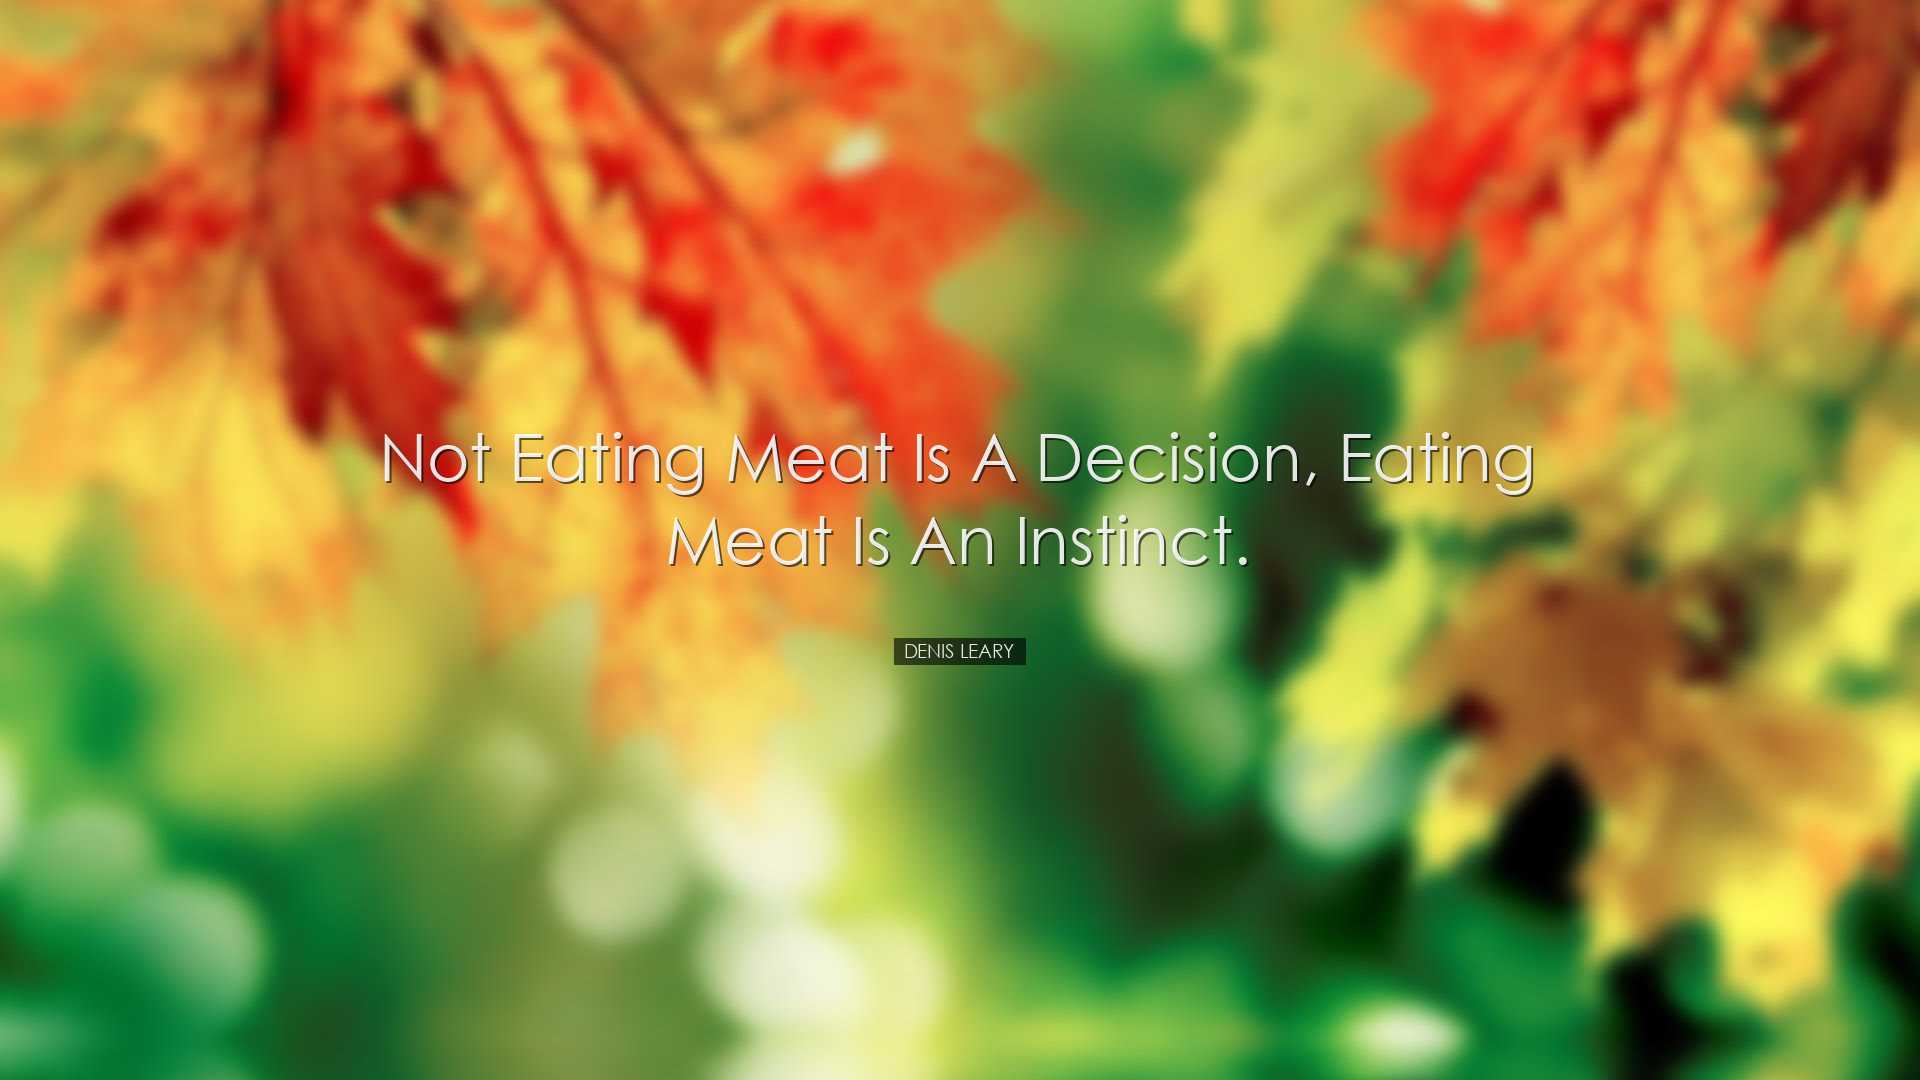 Not eating meat is a decision, eating meat is an instinct. - Denis